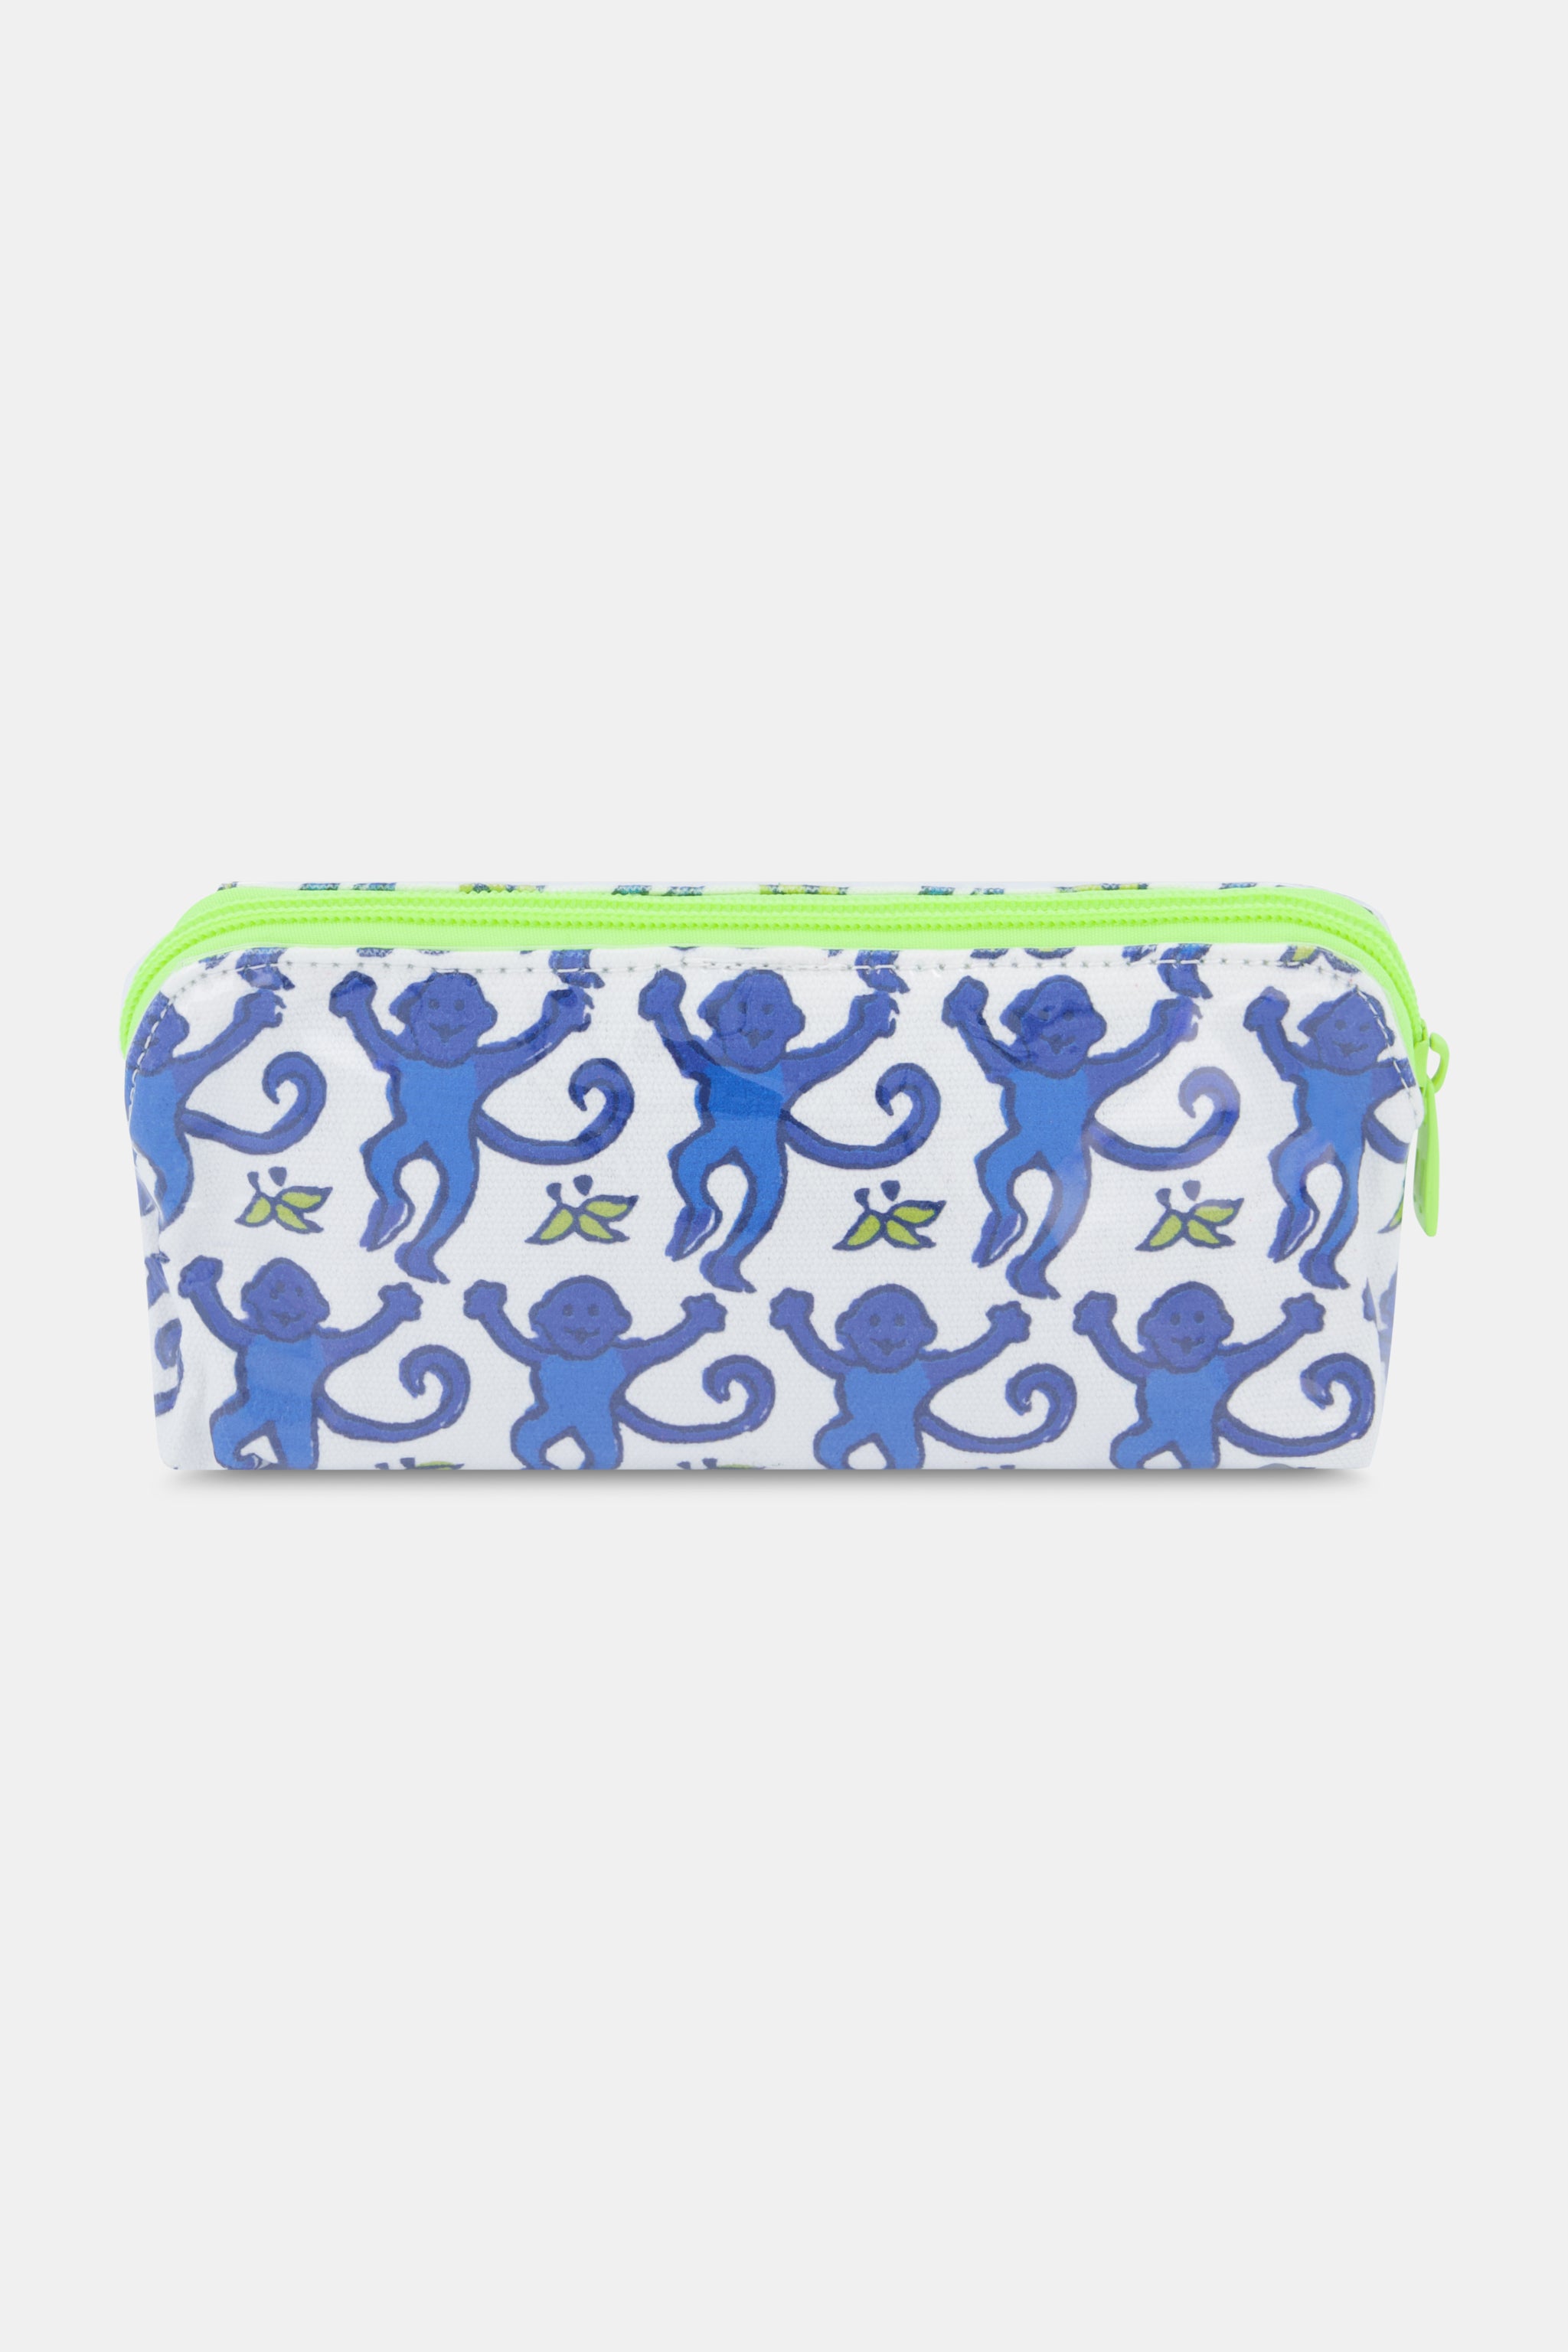 MINKARS Personalized Toiletry Bag, Cosmetic Bag